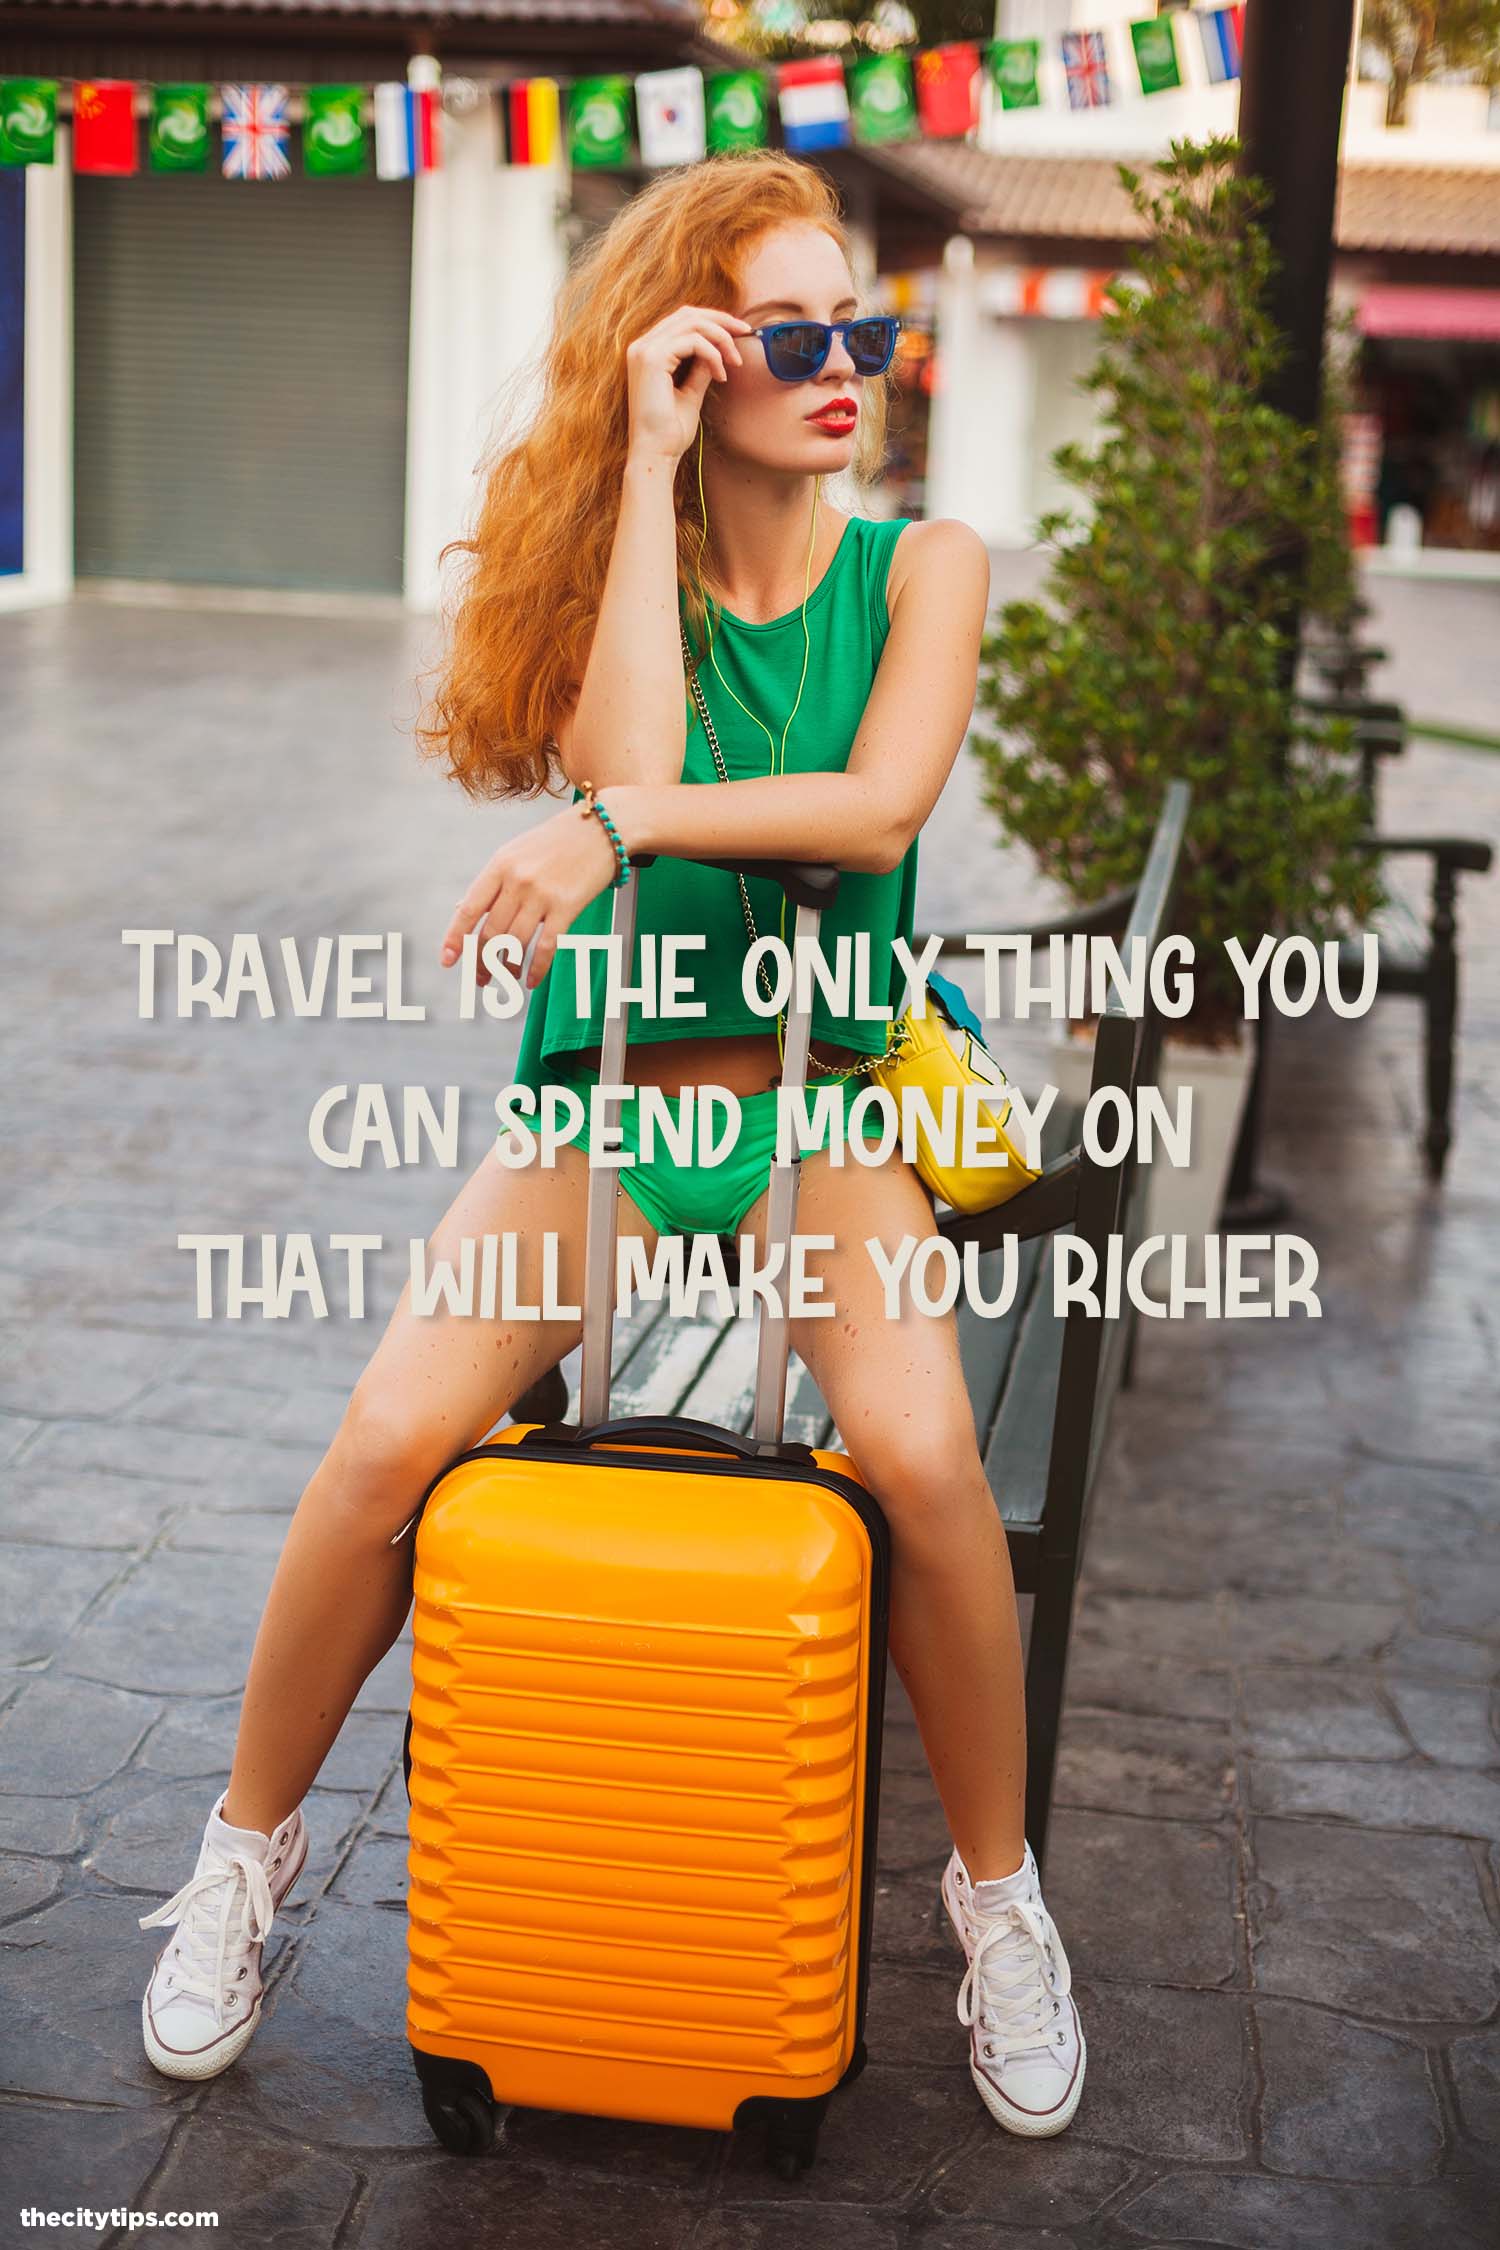 "Travel is the only thing you can spend money on that will make you richer."